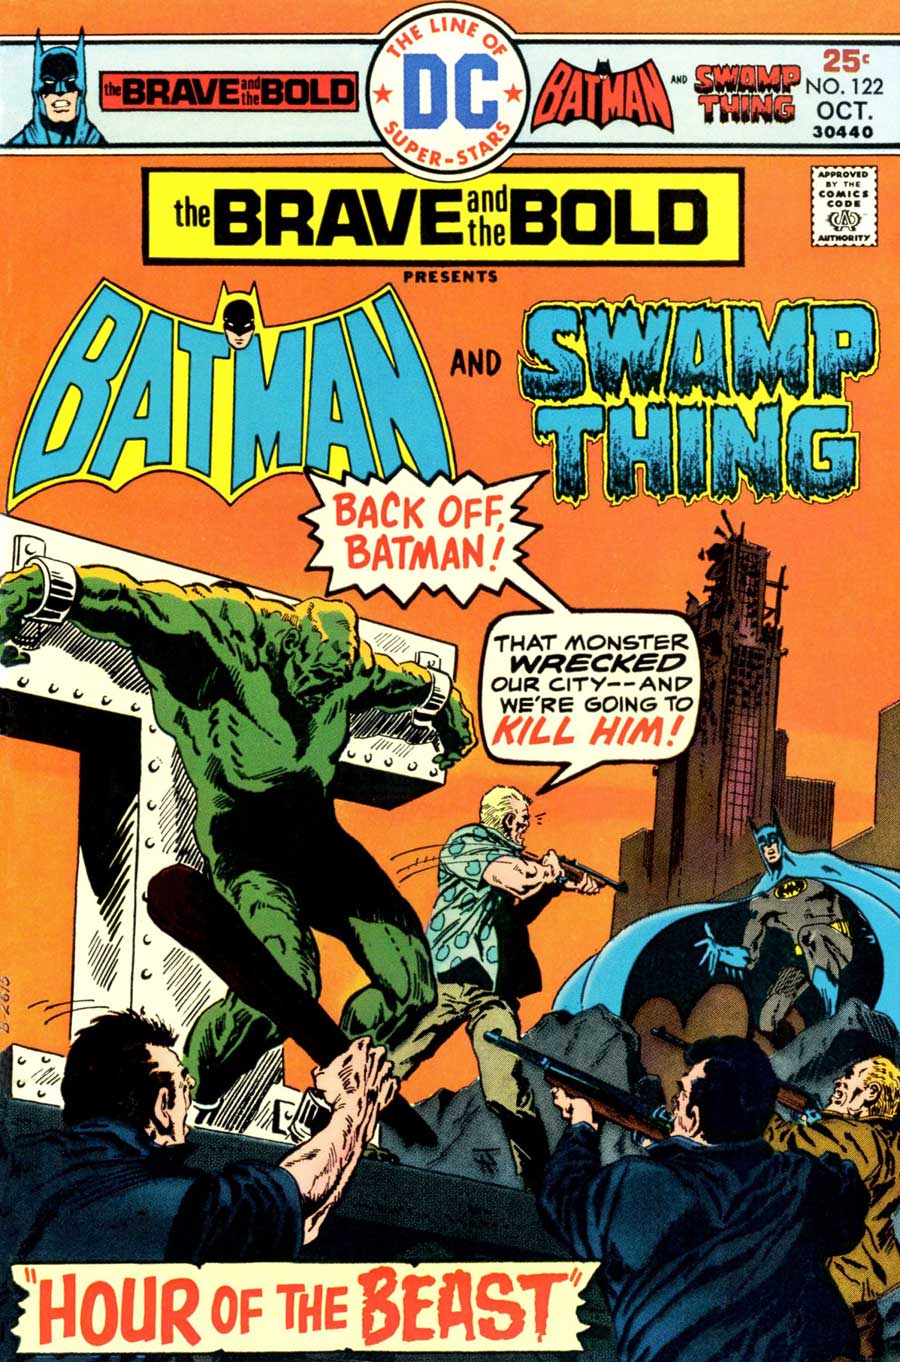 The Brave and the Bold #122 by Bob Haney and Jim Aparo with Batman and Swamp Thing